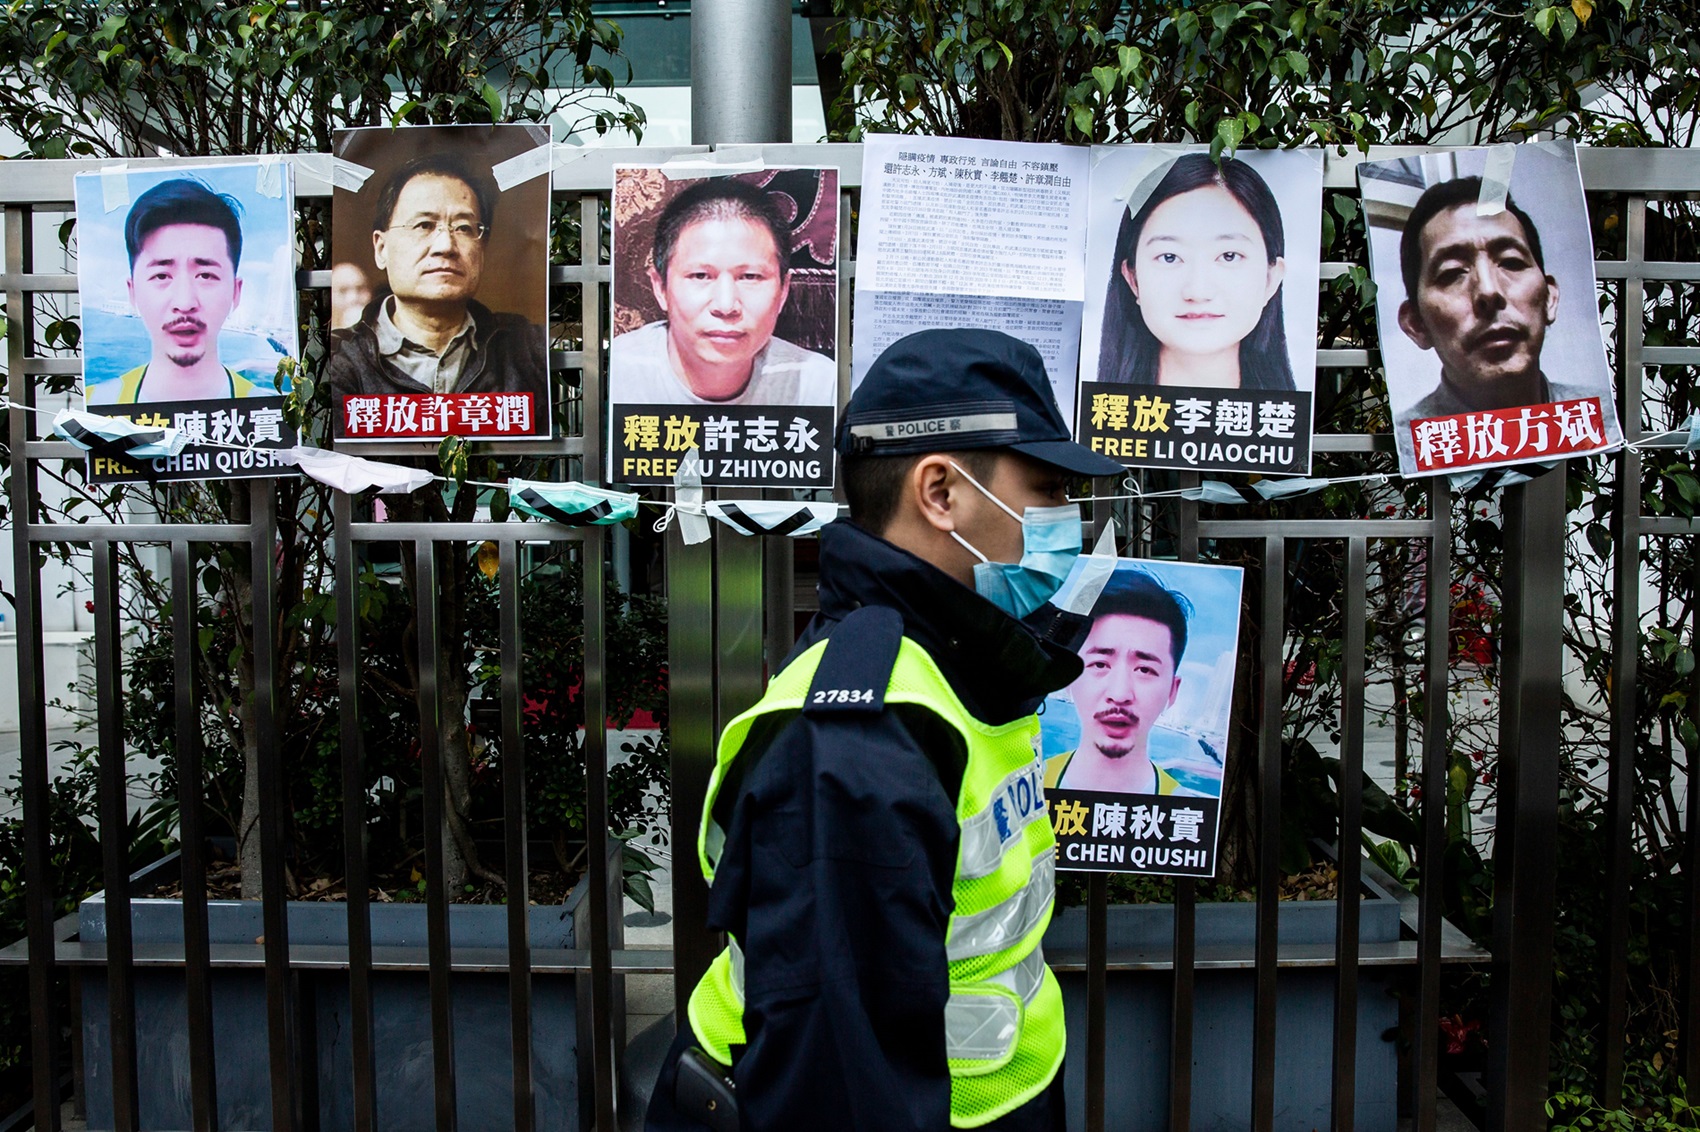 Beijing Is Pouring Resources into Its UN Human Rights Review—All to Prevent Any Real Review from Taking Place